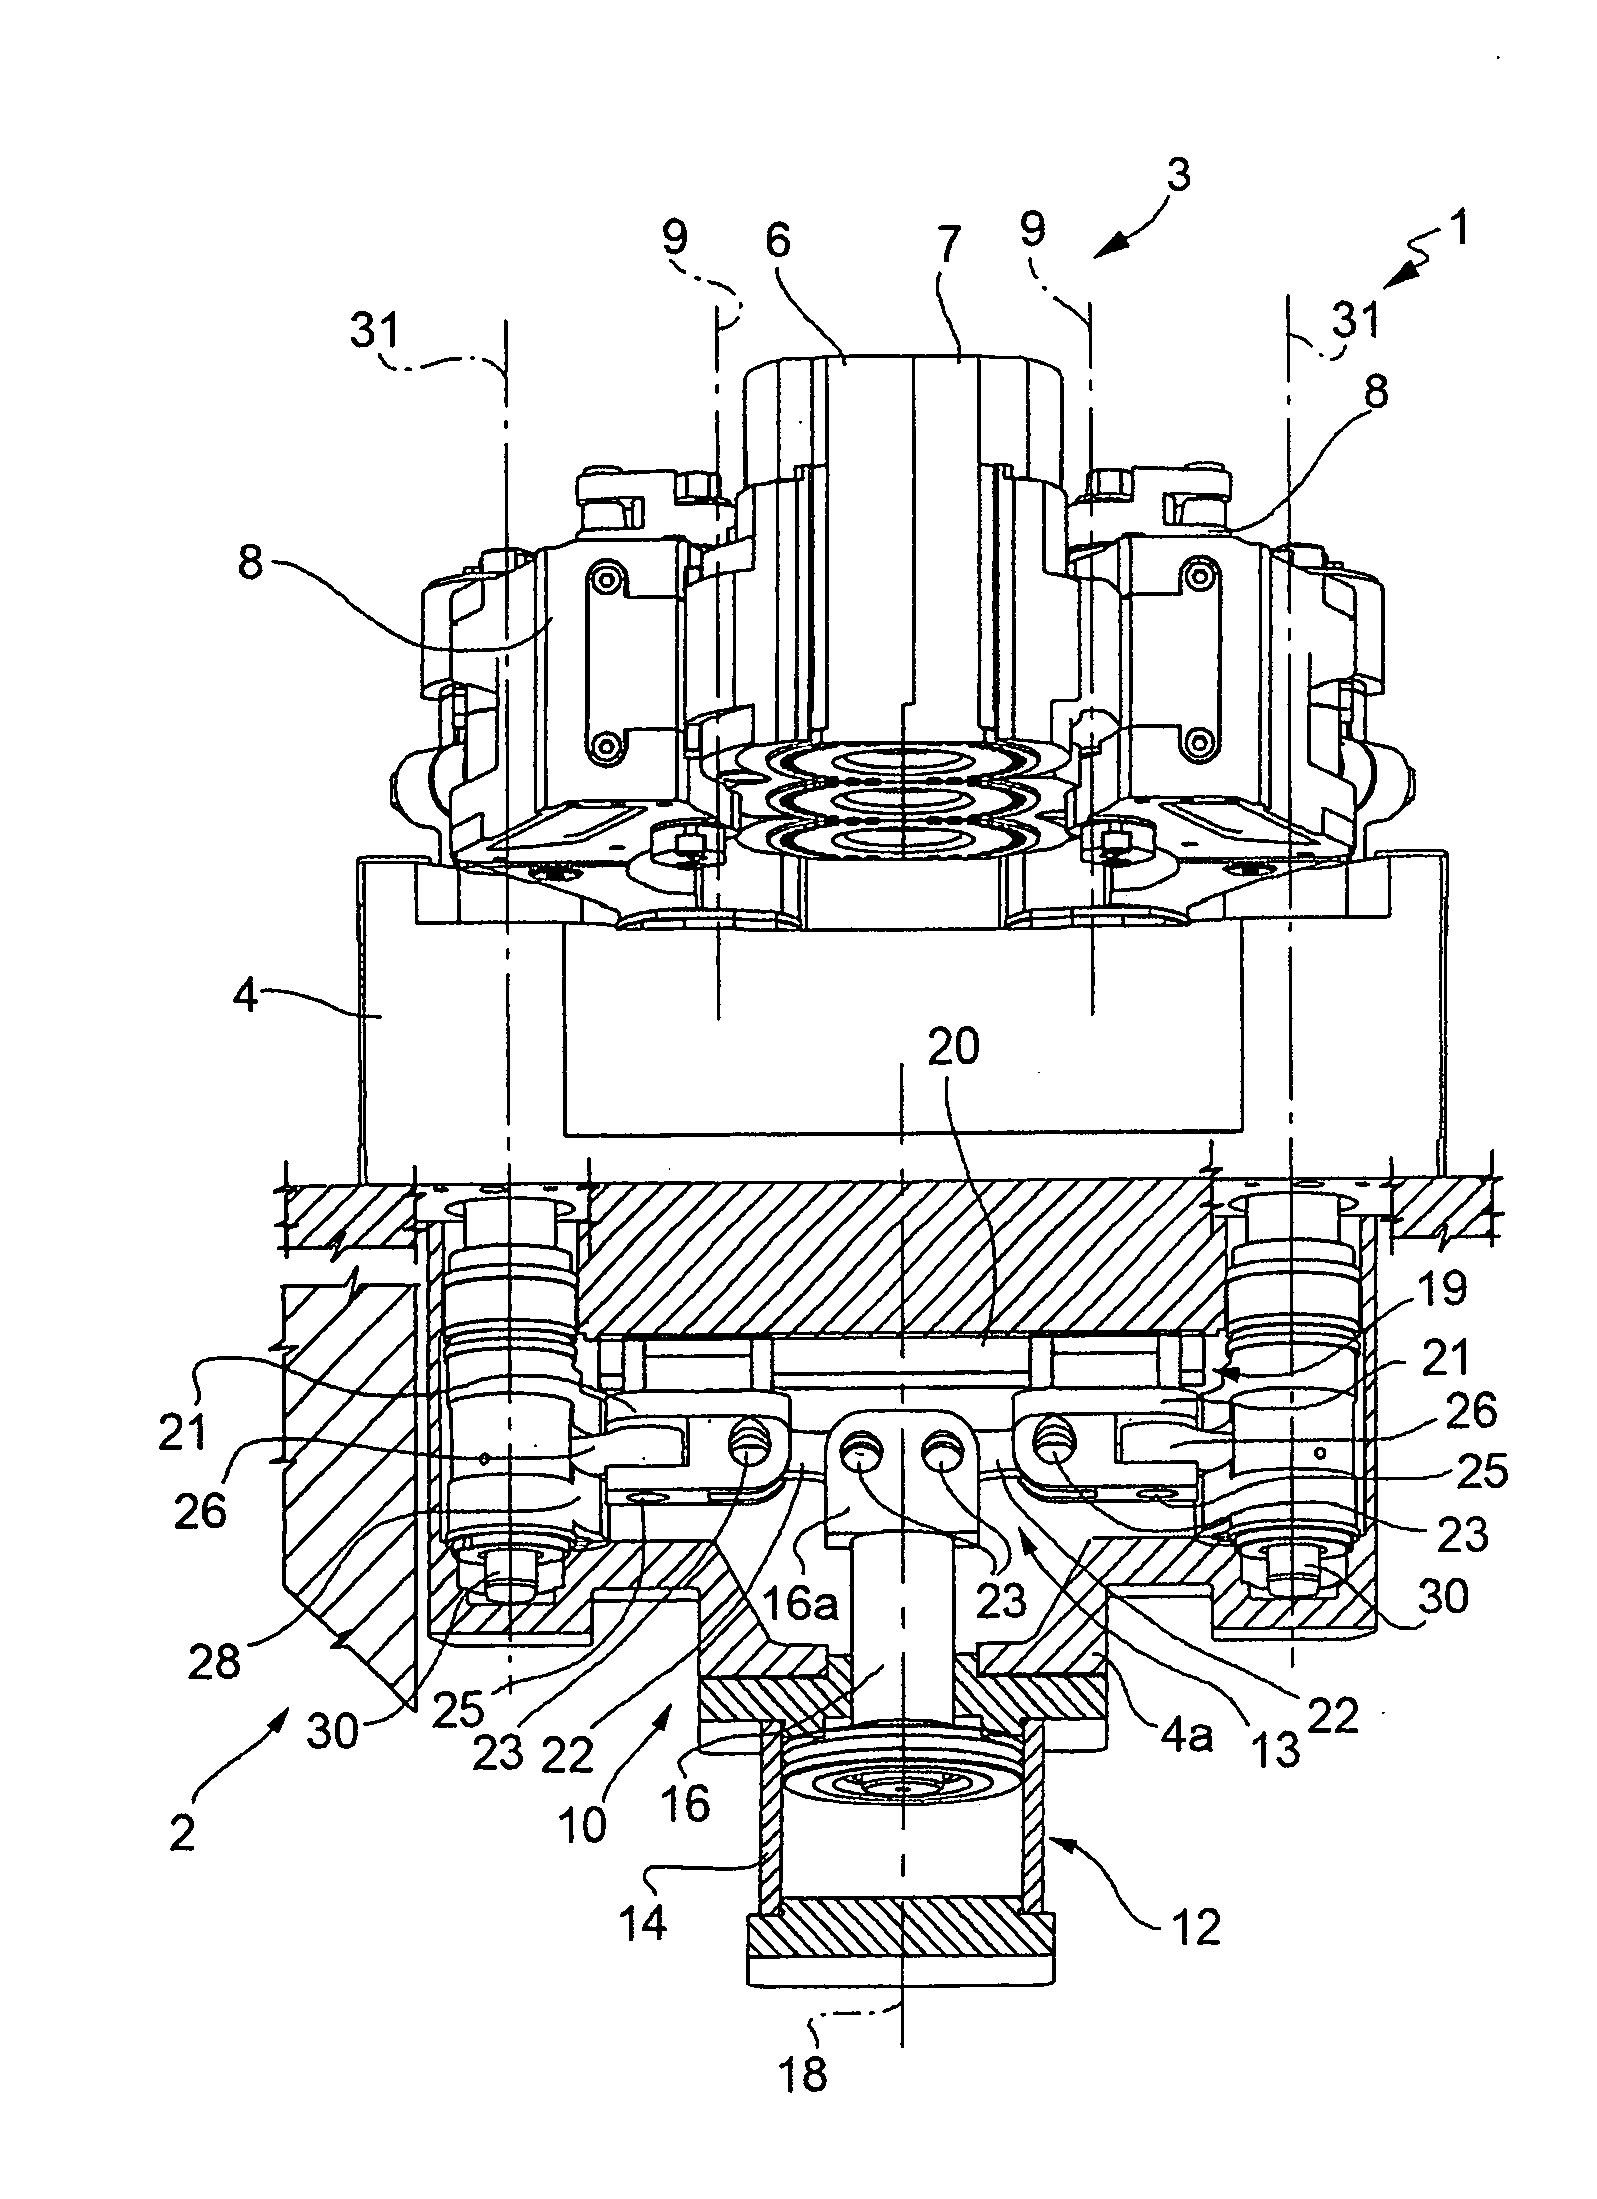 Molds opening/closing group of a forming glass machine items